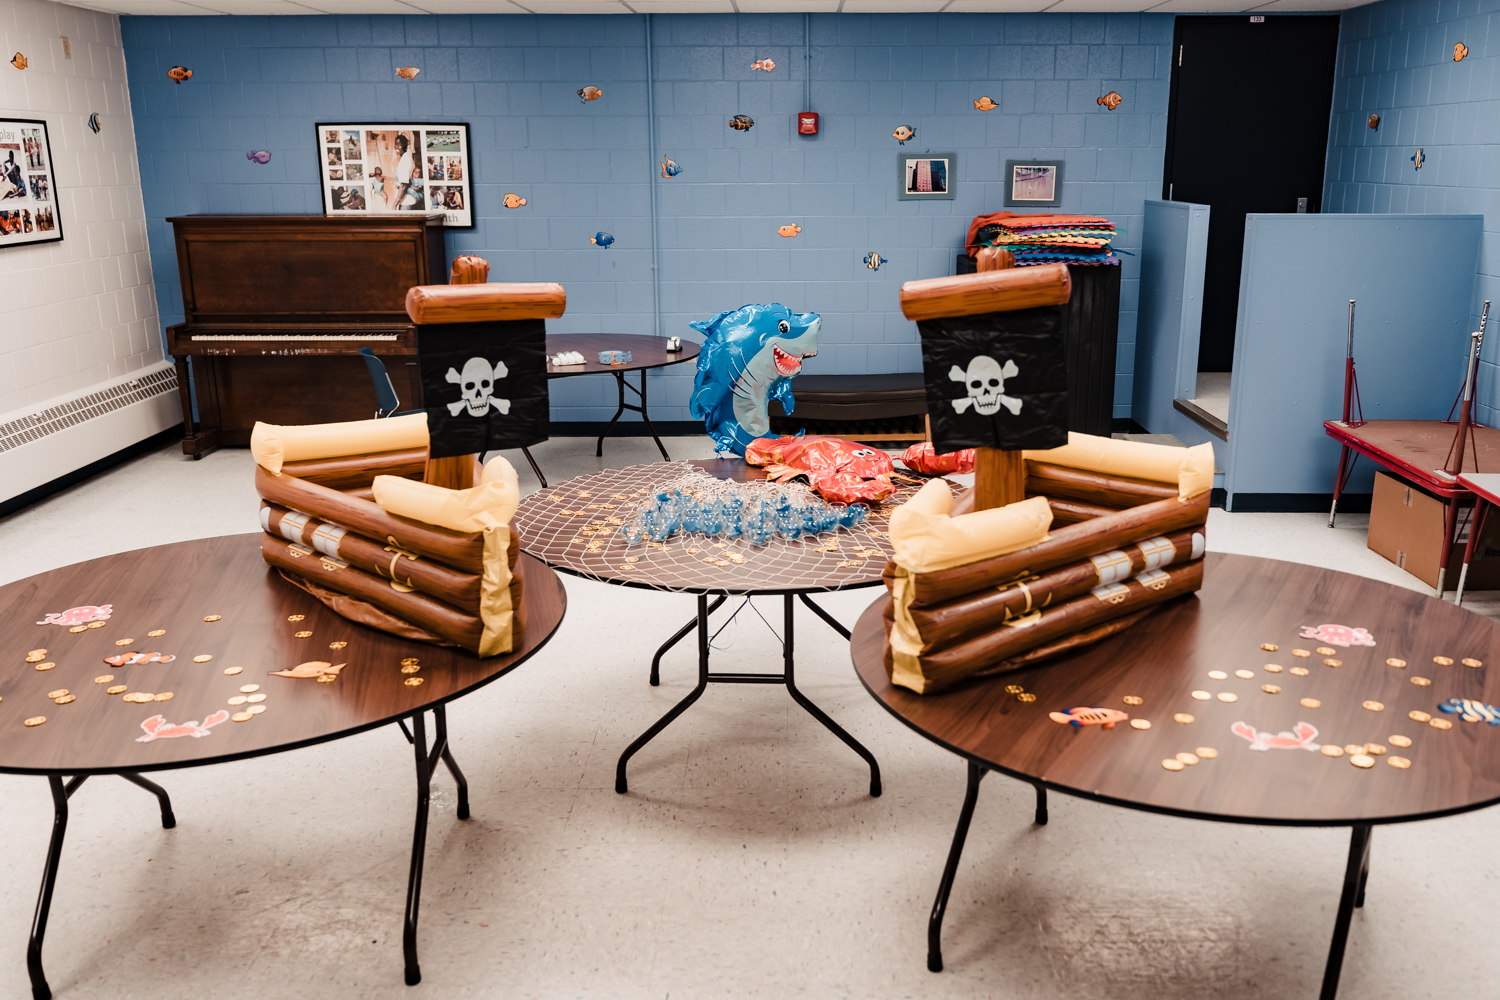 Pirate ship-themed decorations on tables and walls